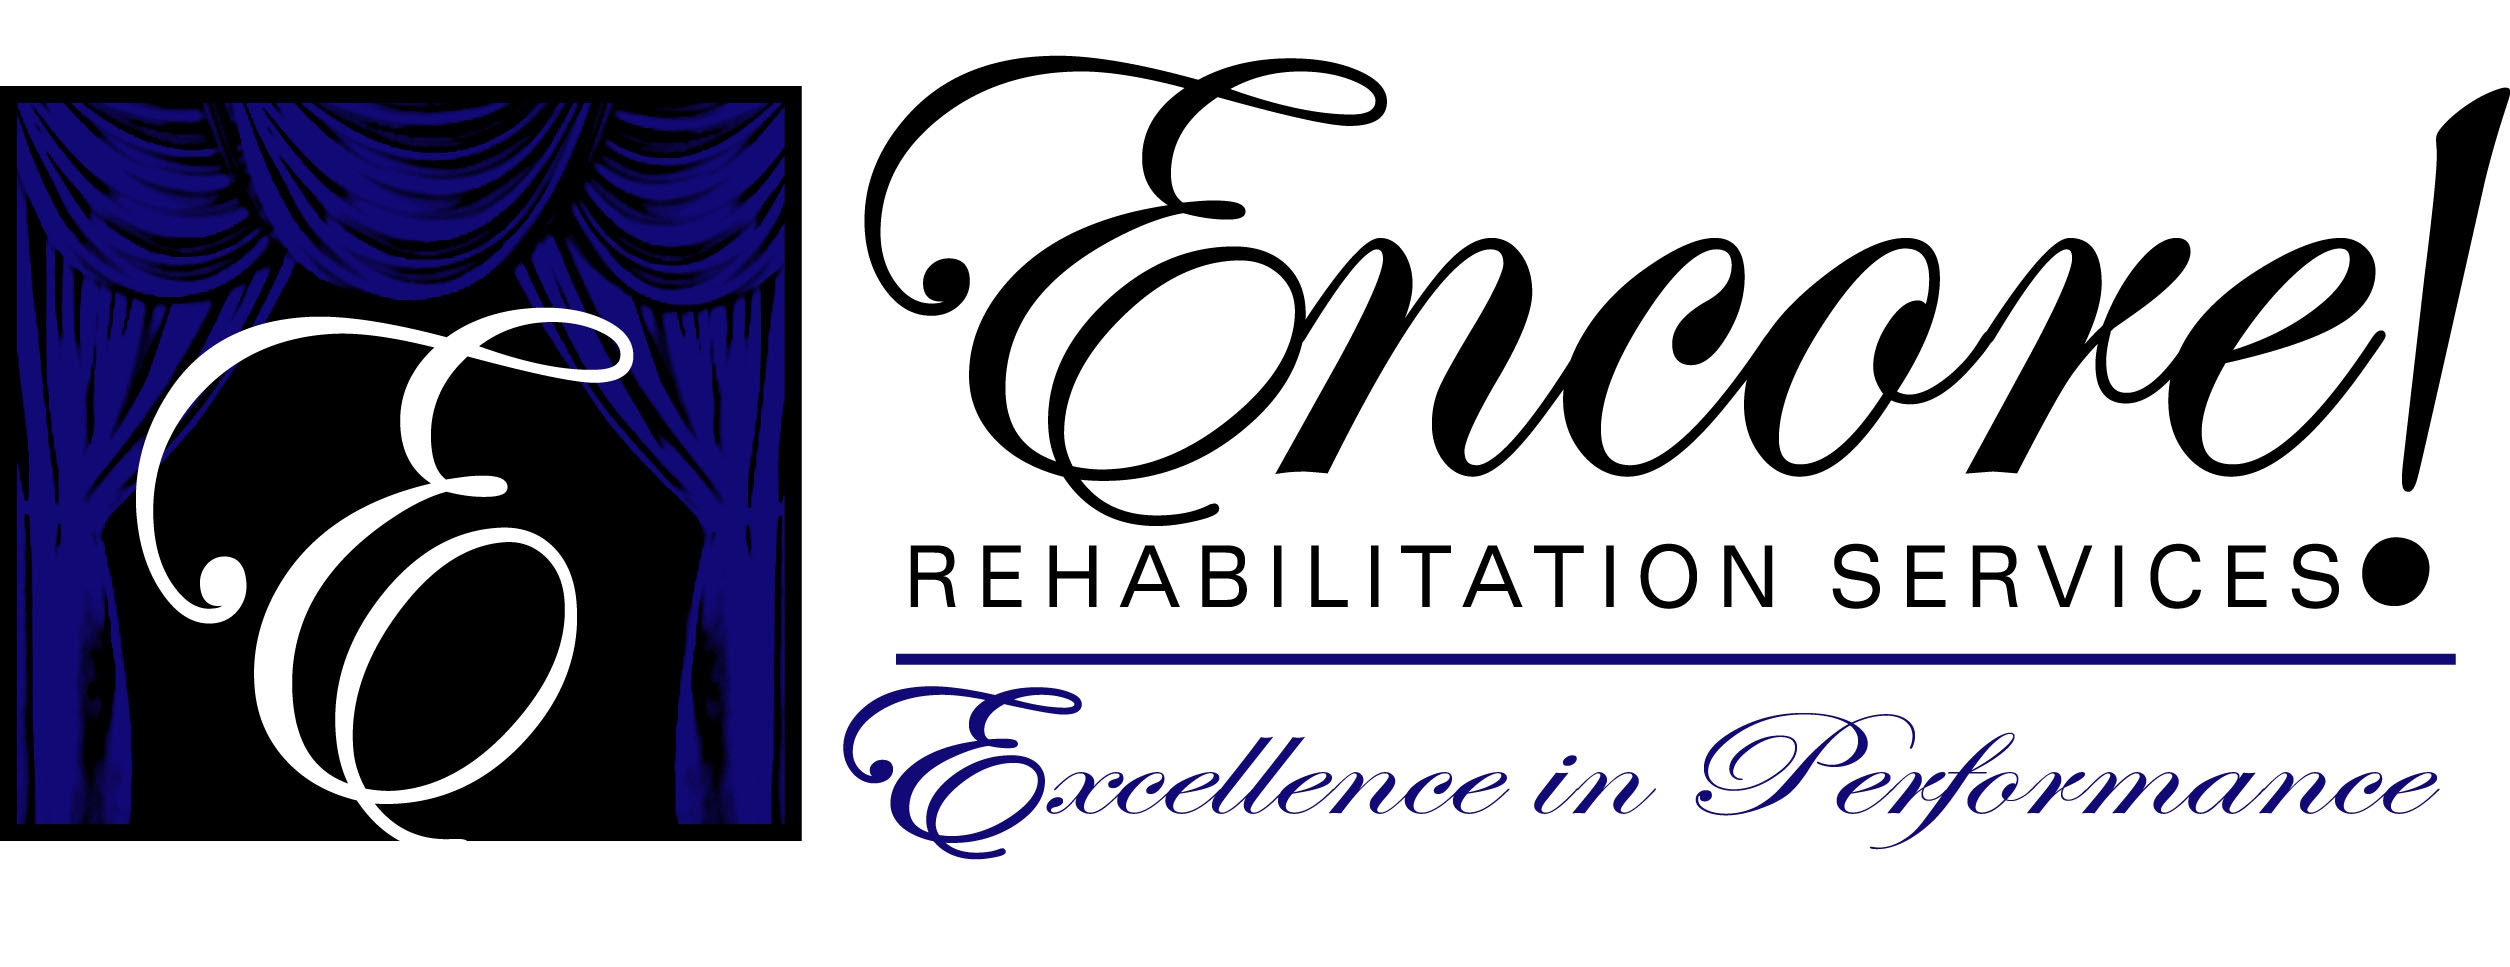 Student Clinical Affiliationâ€¦a Successful, Replicable Model by Encore Rehabilitation